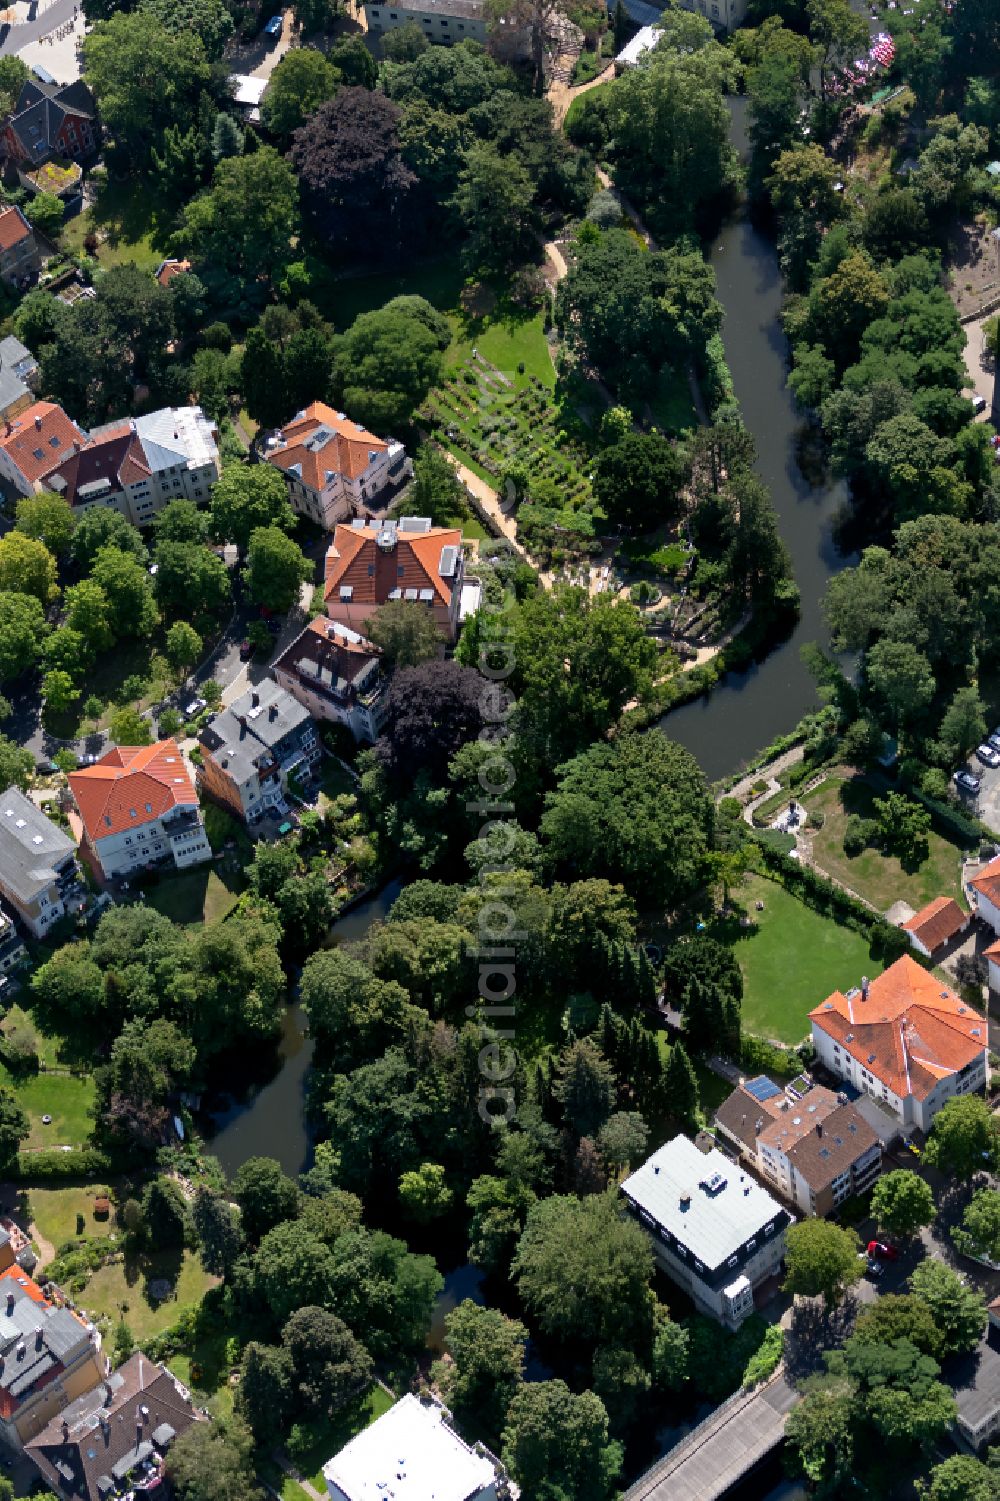 Braunschweig from the bird's eye view: Riparian zones on the course of the river Oker at the botanical garden of the TU Braunschweig in Brunswick in the state Lower Saxony, Germany